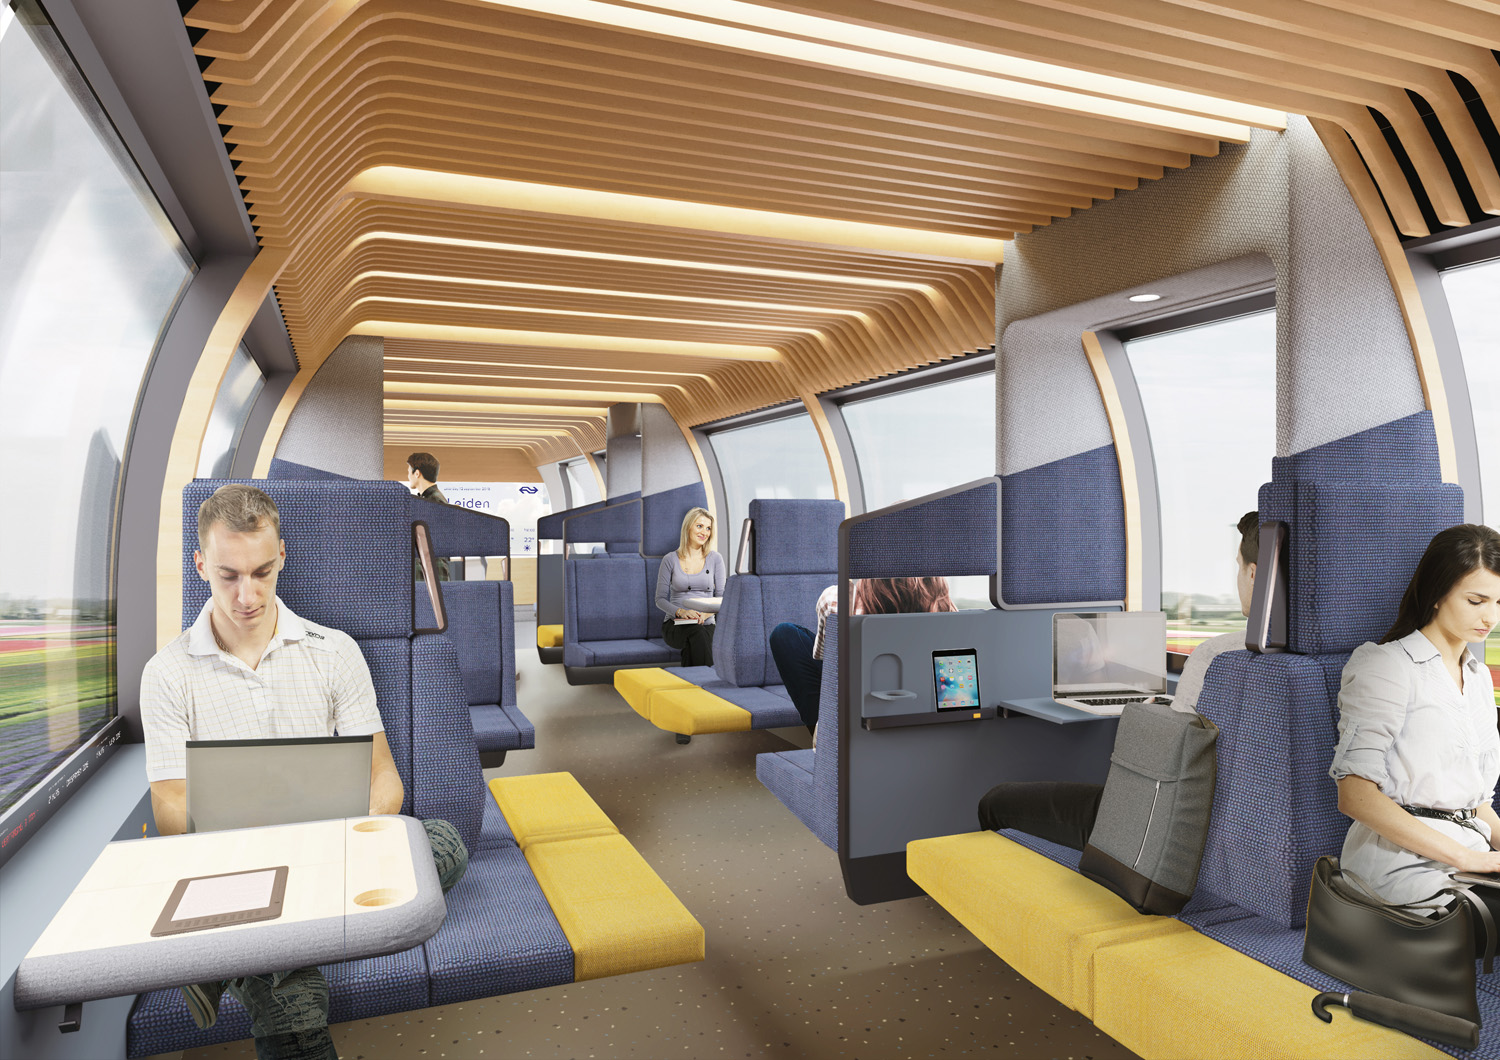 Rendering of the Dutch National Railway Company train concept designed by Mecanoo and Gispen